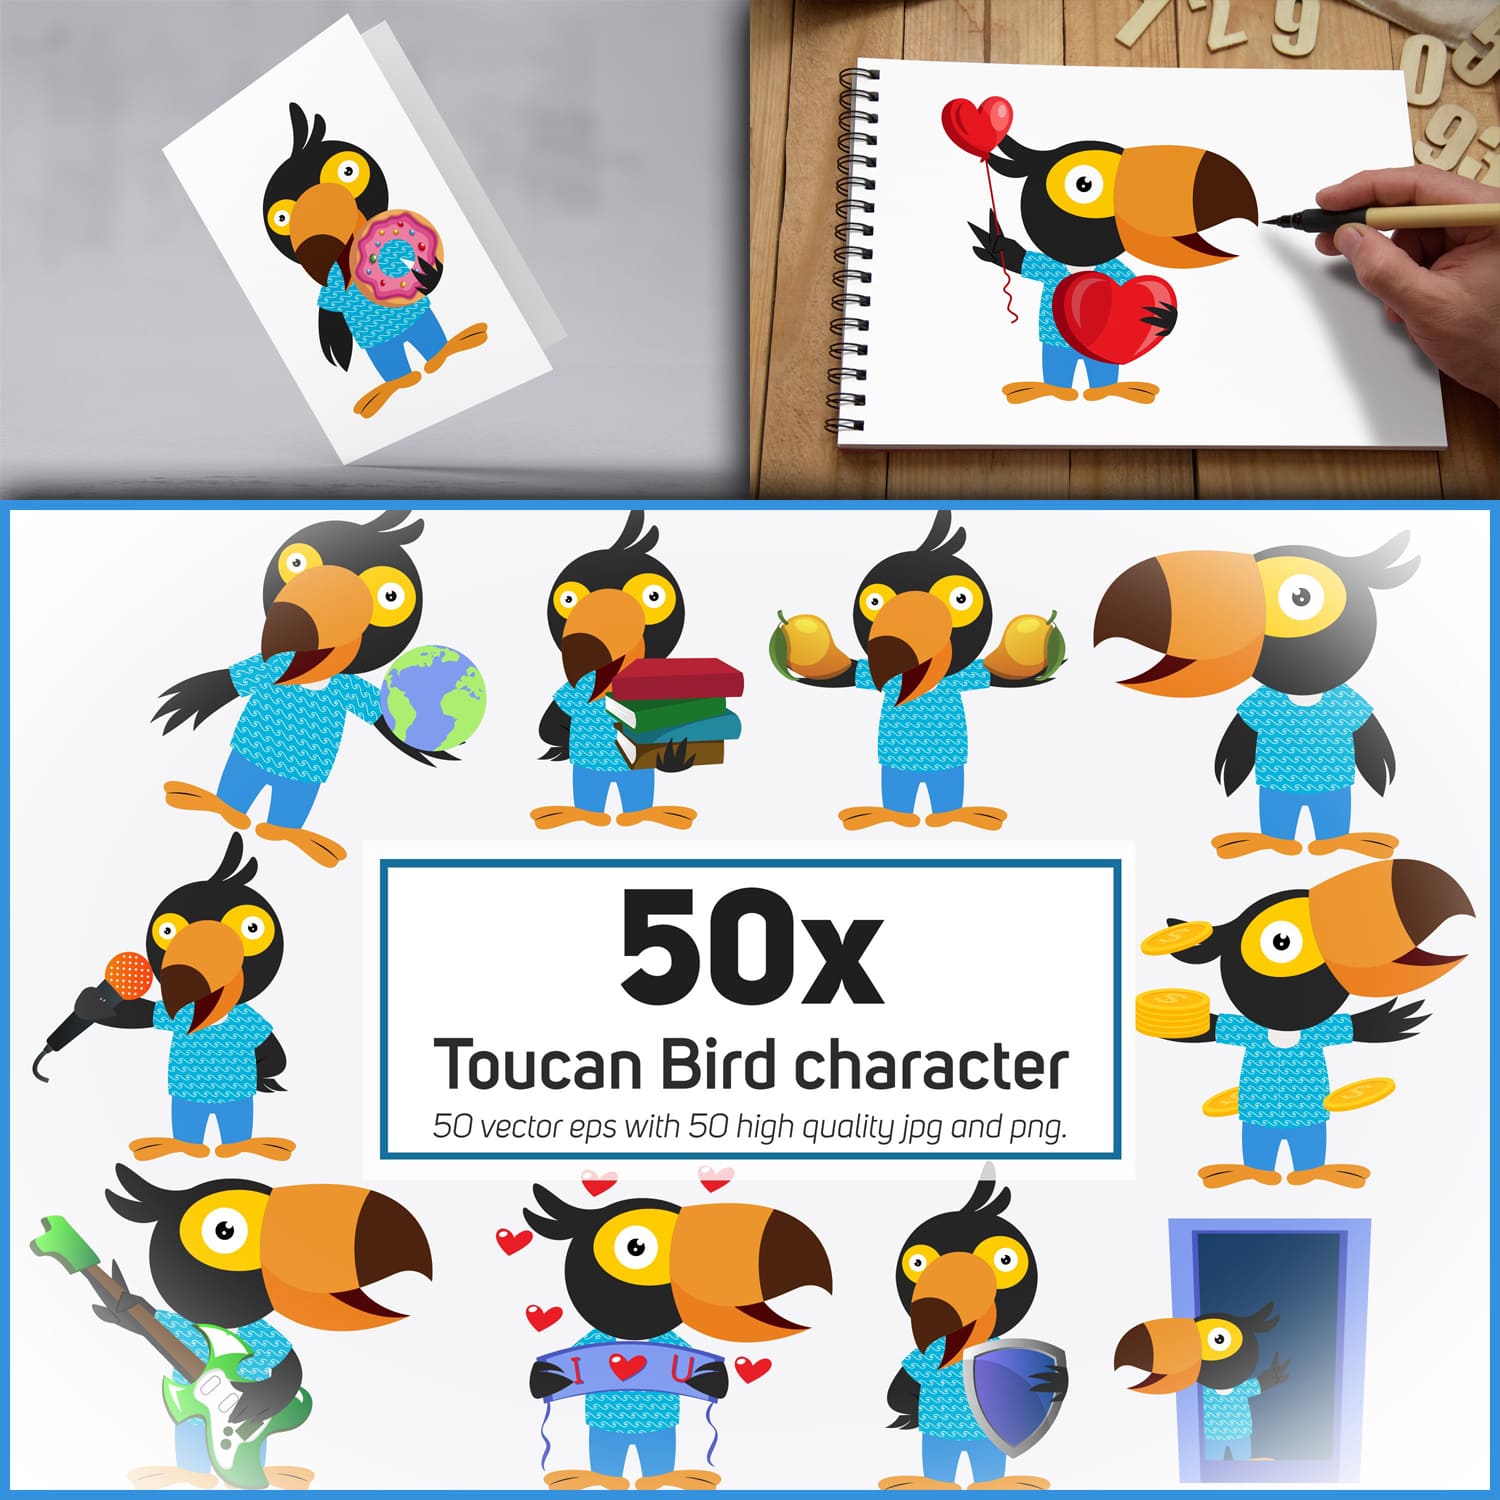 Preview toucan bird character or sticker collection.